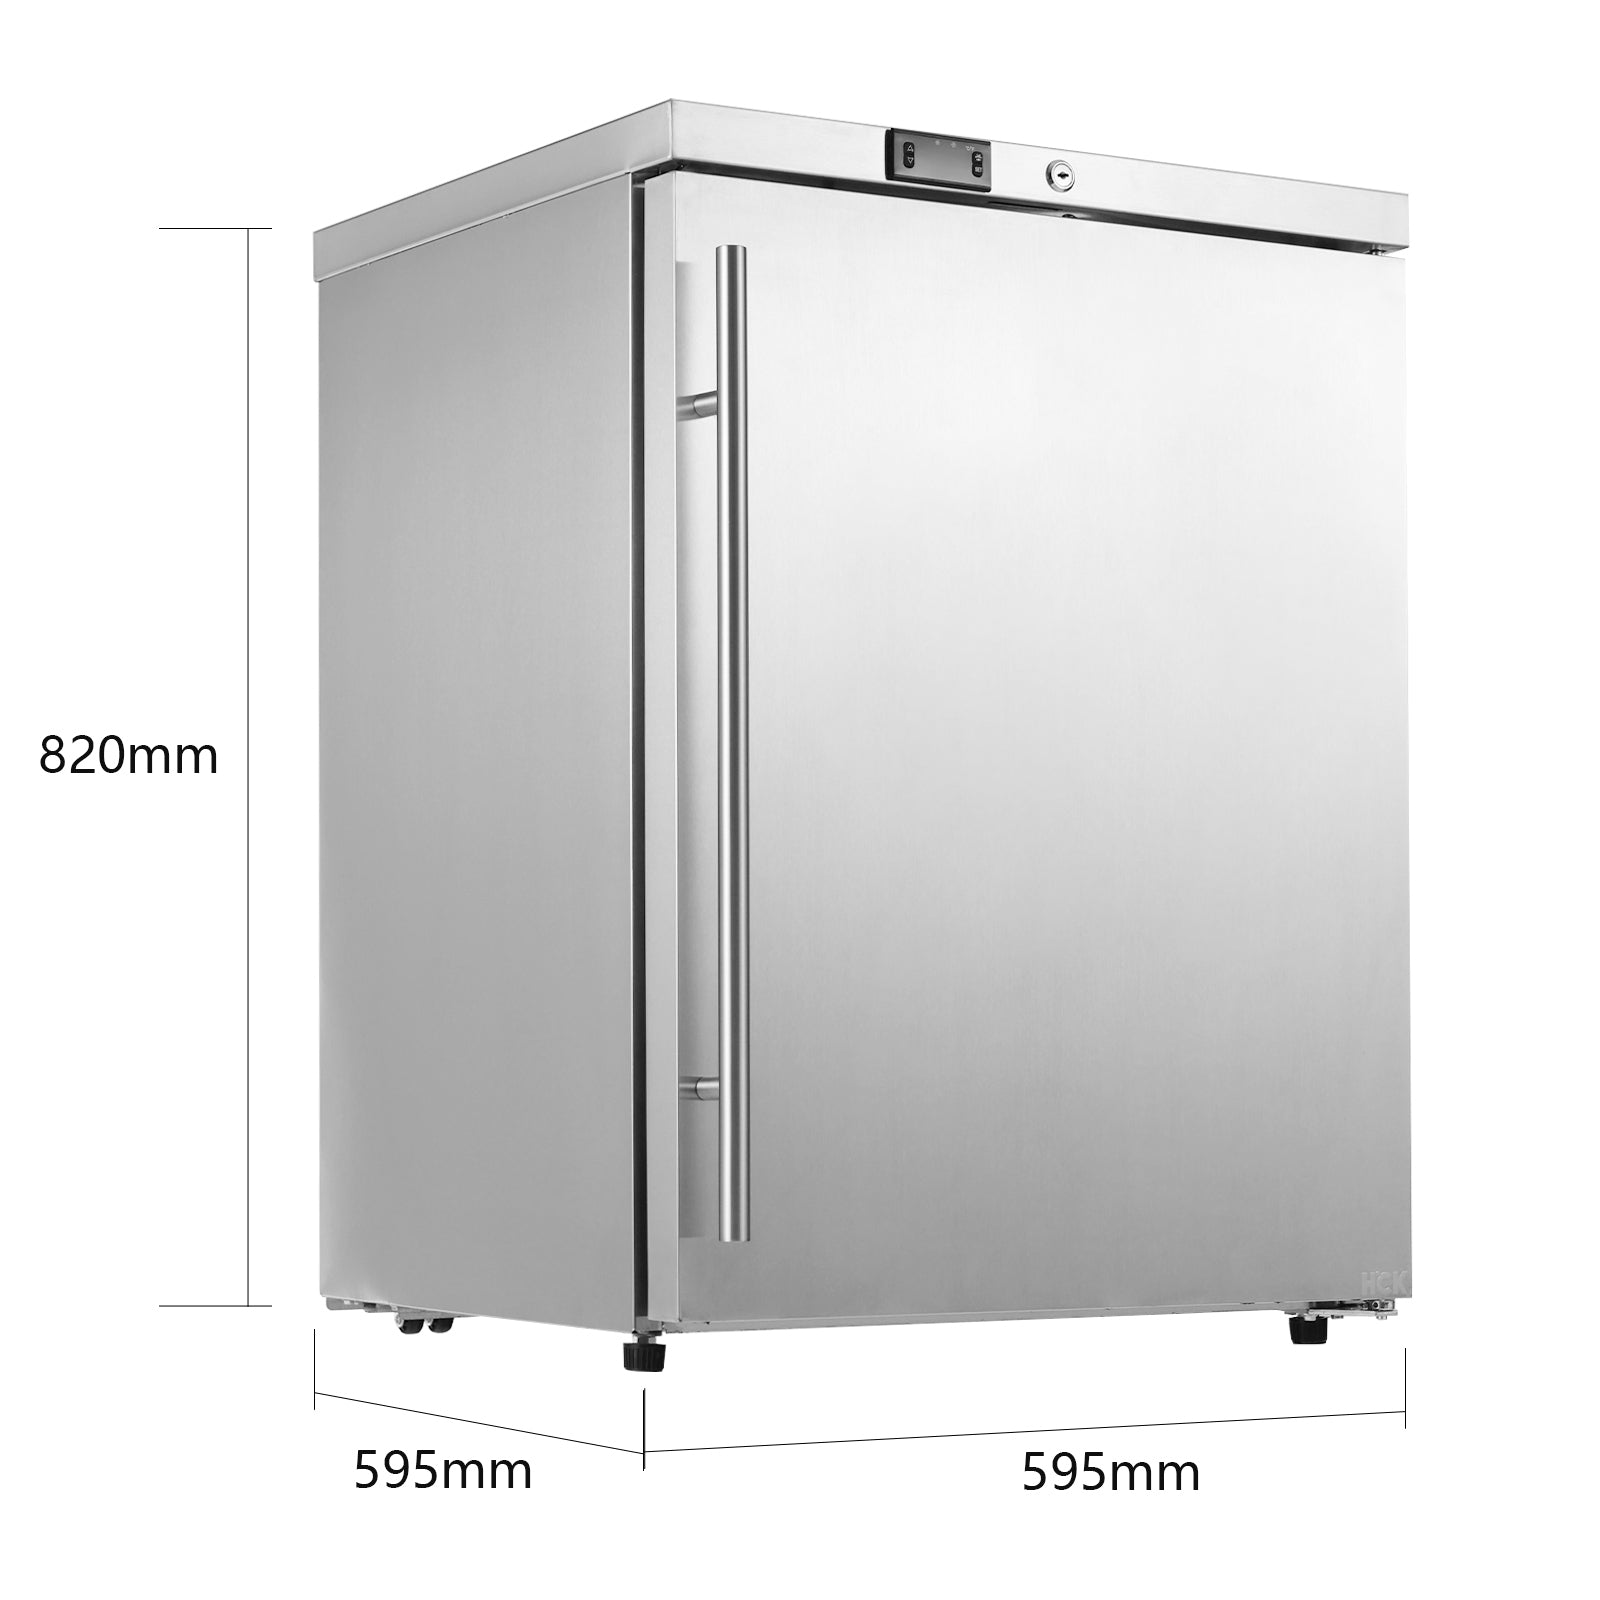 Side view of a 5.4 Cu Ft Stainless Steel Undercounter Outdoor Refrigerator, with visual lines and measurements to indicate its product size